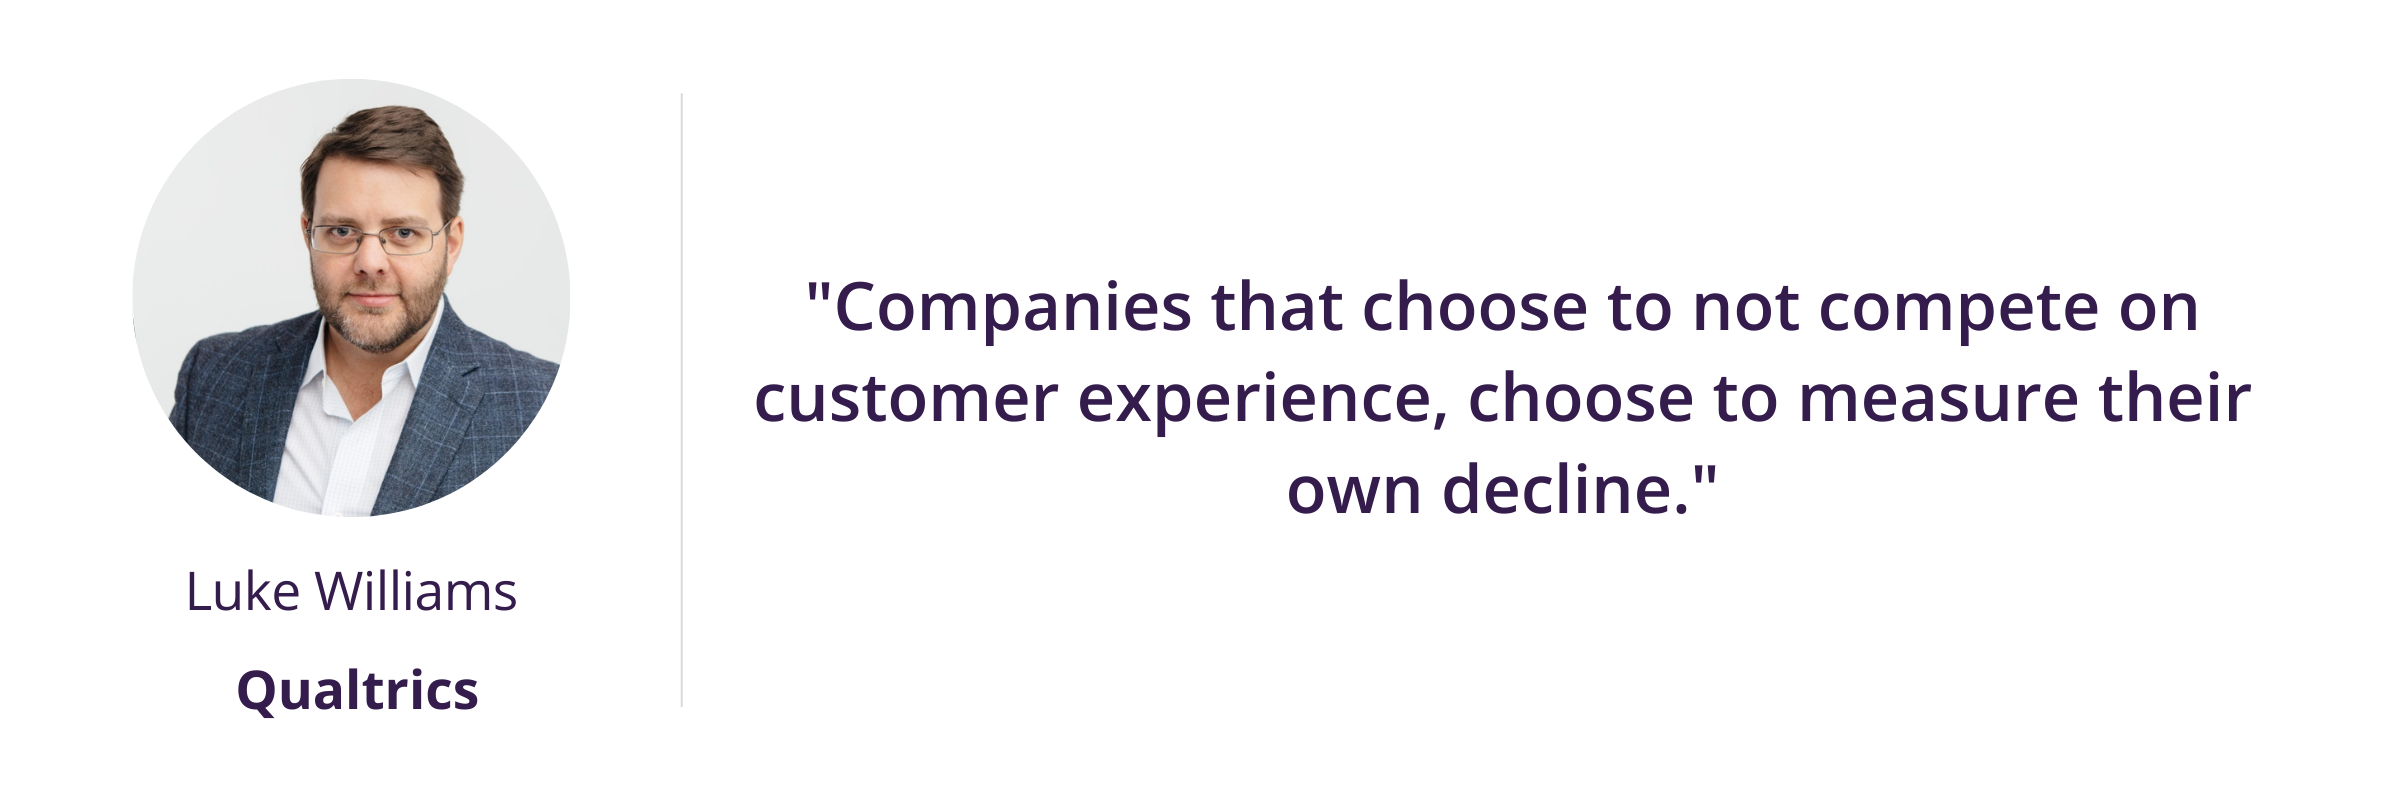 "Companies that choose to not compete on customer experience, choose to measure their own decline."